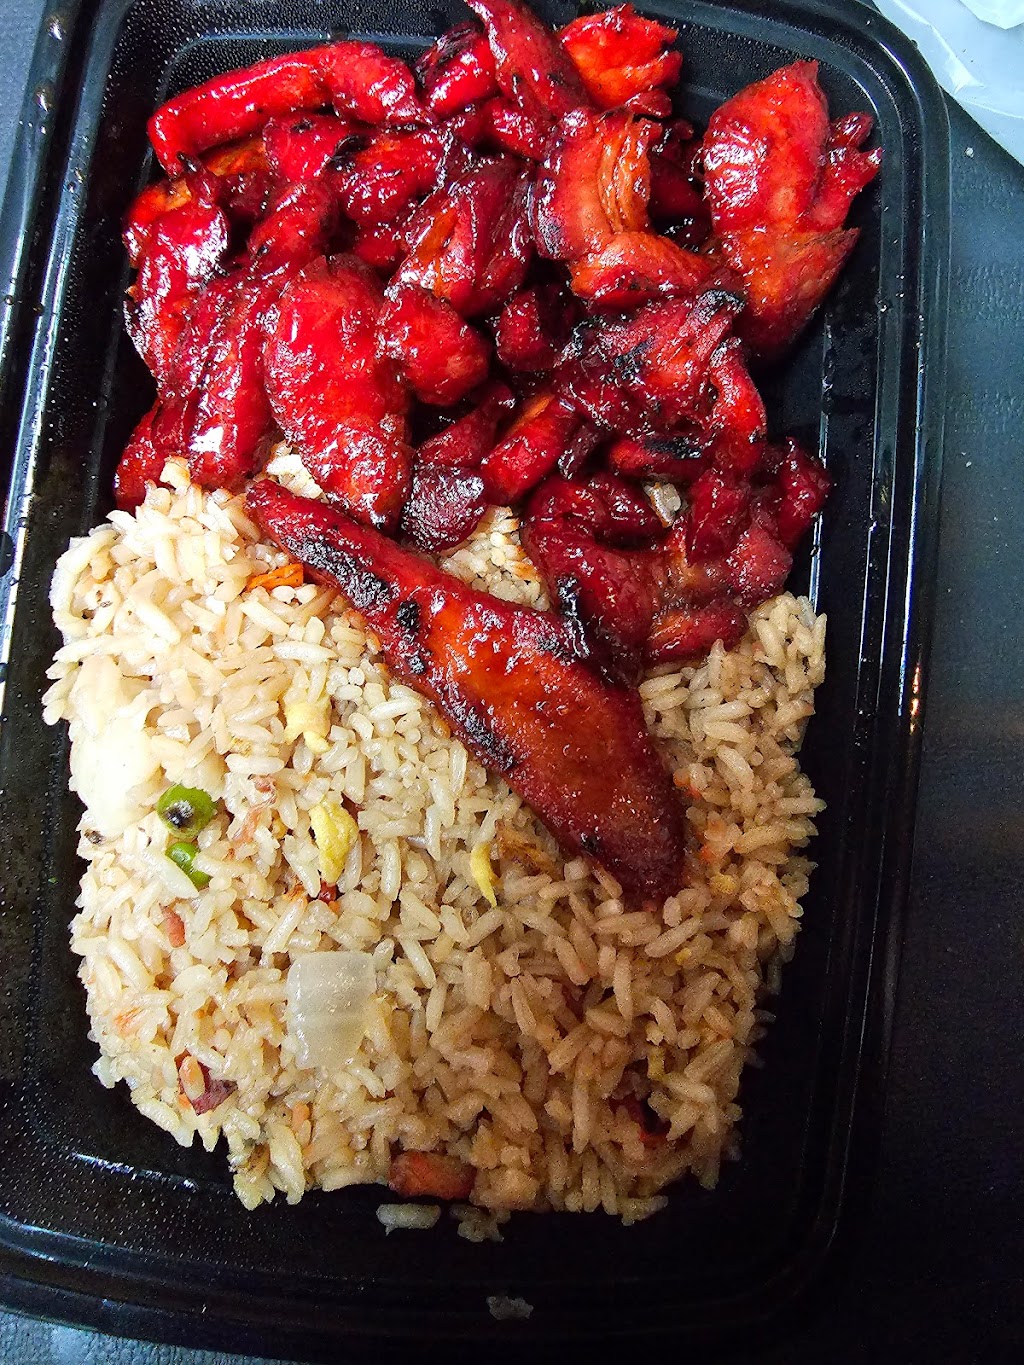 Char Koon Noodle Express | 1095 Kennedy Rd, Windsor, CT 06095 | Phone: (860) 285-0818